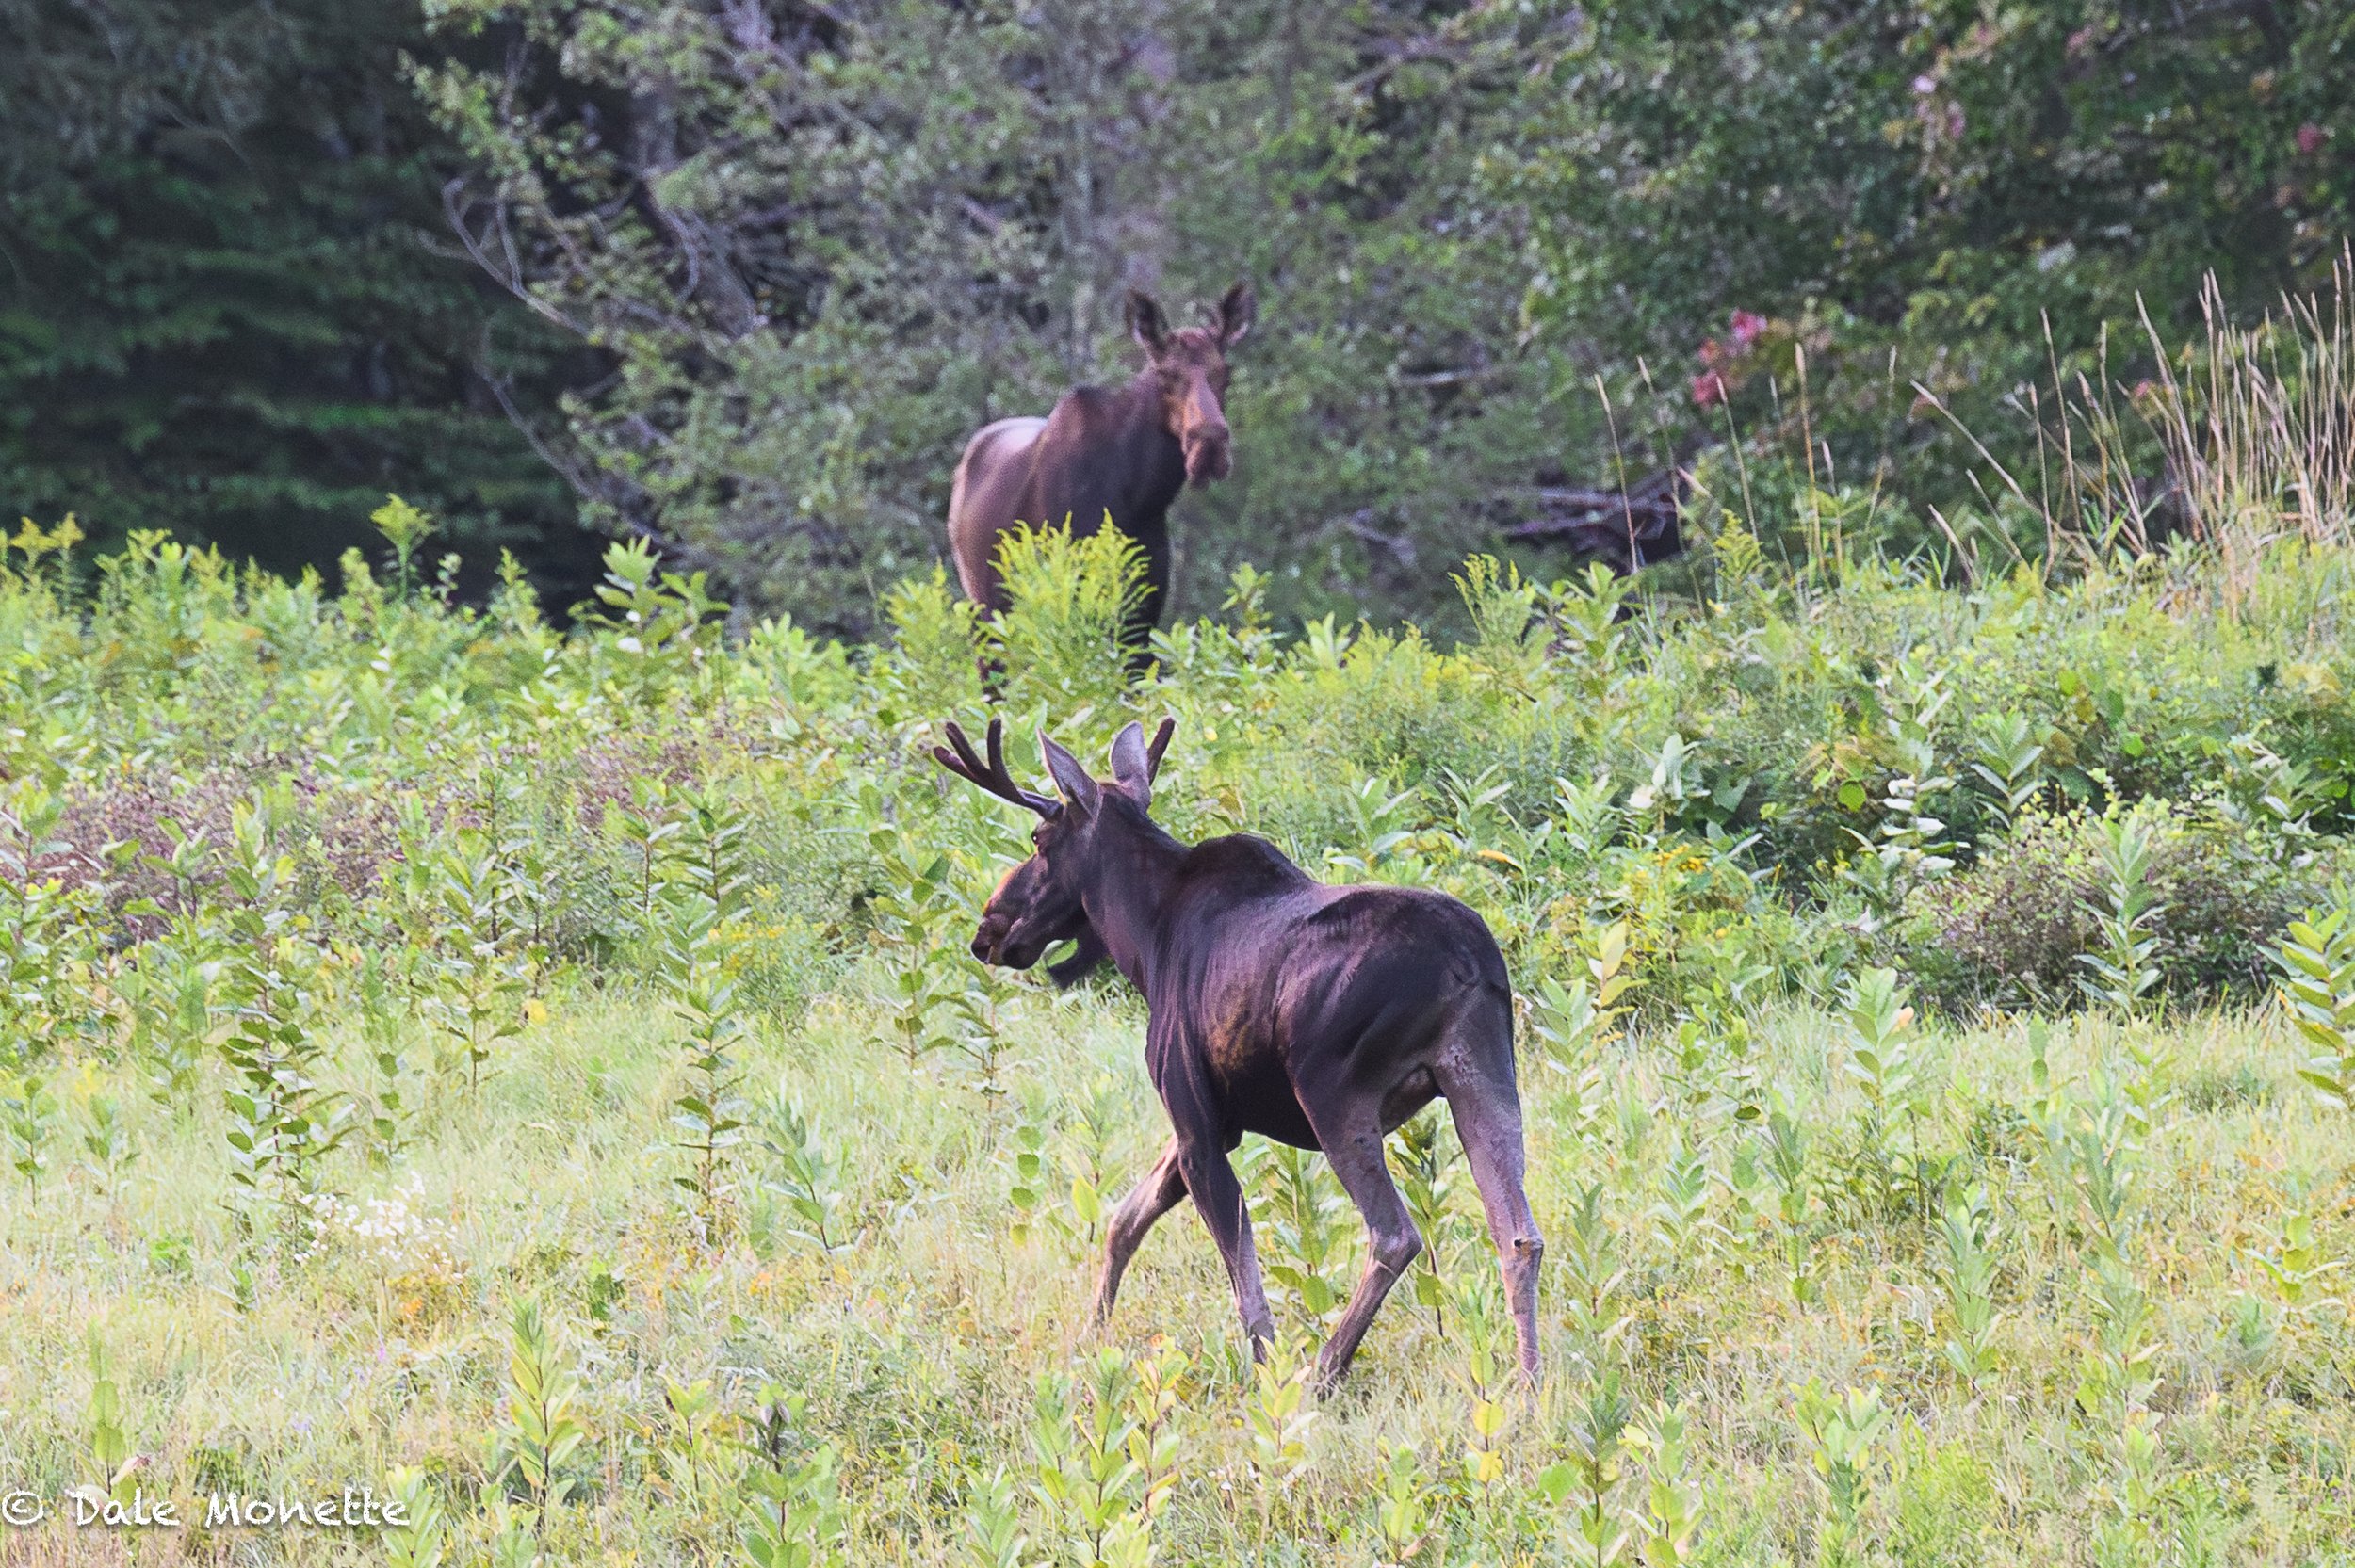   The first moose I have run into since July. … the hot muggy weather must be bothering them and keeping them bedded down during the day.  